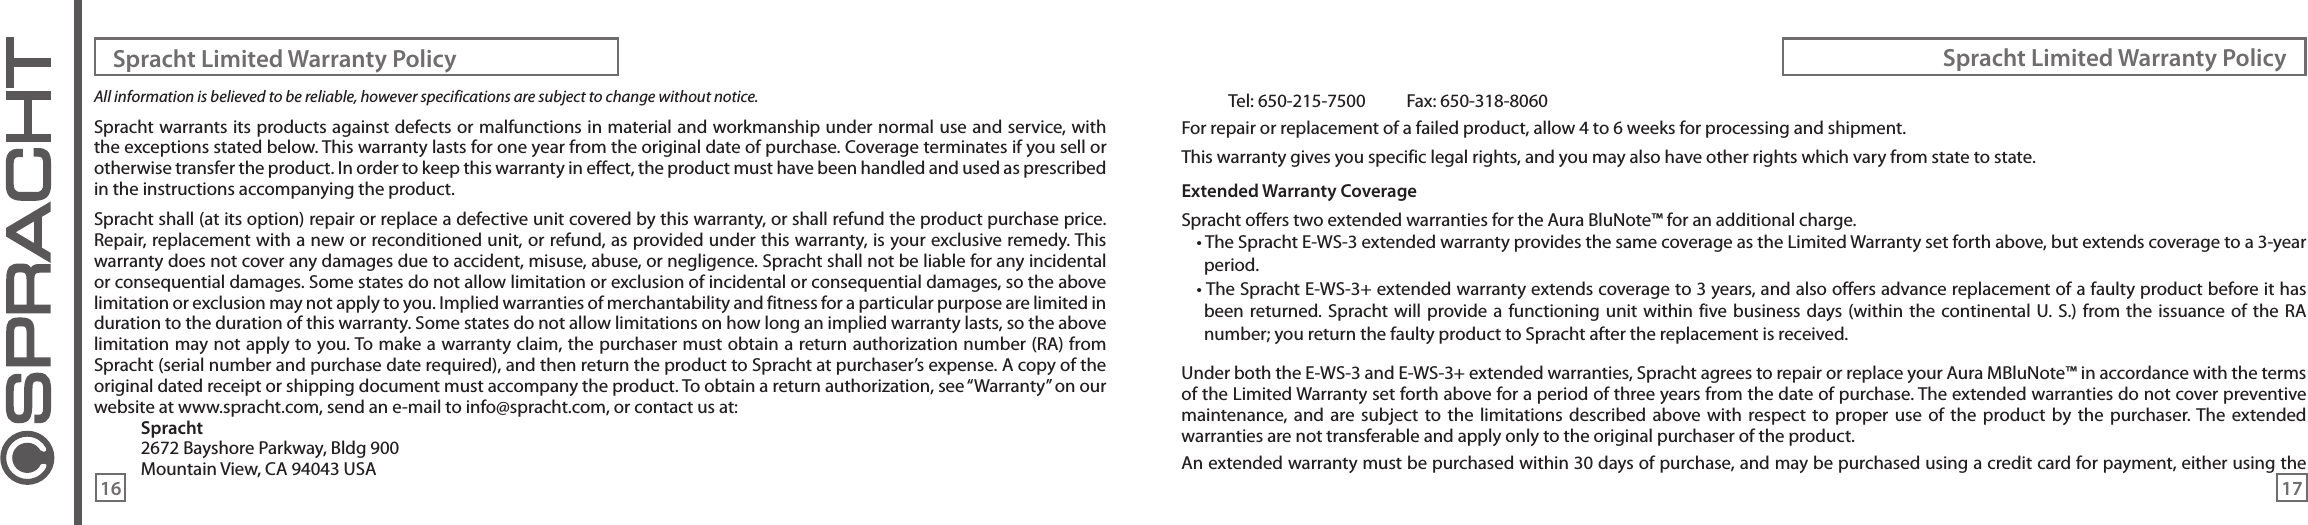 All information is believed to be reliable, however specifications are subject to change without notice.Spracht warrants its products against defects or malfunctions in material and workmanship under normal use and service, with the exceptions stated below. This warranty lasts for one year from the original date of purchase. Coverage terminates if you sell or otherwise transfer the product. In order to keep this warranty in effect, the product must have been handled and used as prescribed in the instructions accompanying the product.Spracht shall (at its option) repair or replace a defective unit covered by this warranty, or shall refund the product purchase price. Repair, replacement with a new or reconditioned unit, or refund, as provided under this warranty, is your exclusive remedy. This warranty does not cover any damages due to accident, misuse, abuse, or negligence. Spracht shall not be liable for any incidental or consequential damages. Some states do not allow limitation or exclusion of incidental or consequential damages, so the above limitation or exclusion may not apply to you. Implied warranties of merchantability and fitness for a particular purpose are limited in duration to the duration of this warranty. Some states do not allow limitations on how long an implied warranty lasts, so the above limitation may not apply to you. To make a warranty claim, the purchaser must obtain a return authorization number (RA) from Spracht (serial number and purchase date required), and then return the product to Spracht at purchaser’s expense. A copy of the original dated receipt or shipping document must accompany the product. To obtain a return authorization, see “Warranty” on our website at www.spracht.com, send an e-mail to info@spracht.com, or contact us at:Spracht2672 Bayshore Parkway, Bldg 900Mountain View, CA 94043 USATel: 650-215-7500  Fax: 650-318-8060For repair or replacement of a failed product, allow 4 to 6 weeks for processing and shipment.This warranty gives you specific legal rights, and you may also have other rights which vary from state to state.Extended Warranty CoverageSpracht offers two extended warranties for the Aura BluNote™ for an additional charge.• The Spracht E-WS-3 extended warranty provides the same coverage as the Limited Warranty set forth above, but extends coverage to a 3-year period.• The Spracht E-WS-3+ extended warranty extends coverage to 3 years, and also offers advance replacement of a faulty product before it has been returned.  Spracht will  provide a  functioning  unit within five  business days  (within the continental U.  S.)  from the  issuance of the  RA number; you return the faulty product to Spracht after the replacement is received.Under both the E-WS-3 and E-WS-3+ extended warranties, Spracht agrees to repair or replace your Aura MBluNote™ in accordance with the terms of the Limited Warranty set forth above for a period of three years from the date of purchase. The extended warranties do not cover preventive maintenance,  and  are  subject  to the  limitations described  above with  respect  to  proper  use  of  the product  by  the  purchaser. The  extended warranties are not transferable and apply only to the original purchaser of the product.An extended warranty must be purchased within 30 days of purchase, and may be purchased using a credit card for payment, either using the Spracht Limited Warranty Policy Spracht Limited Warranty Policy16 17